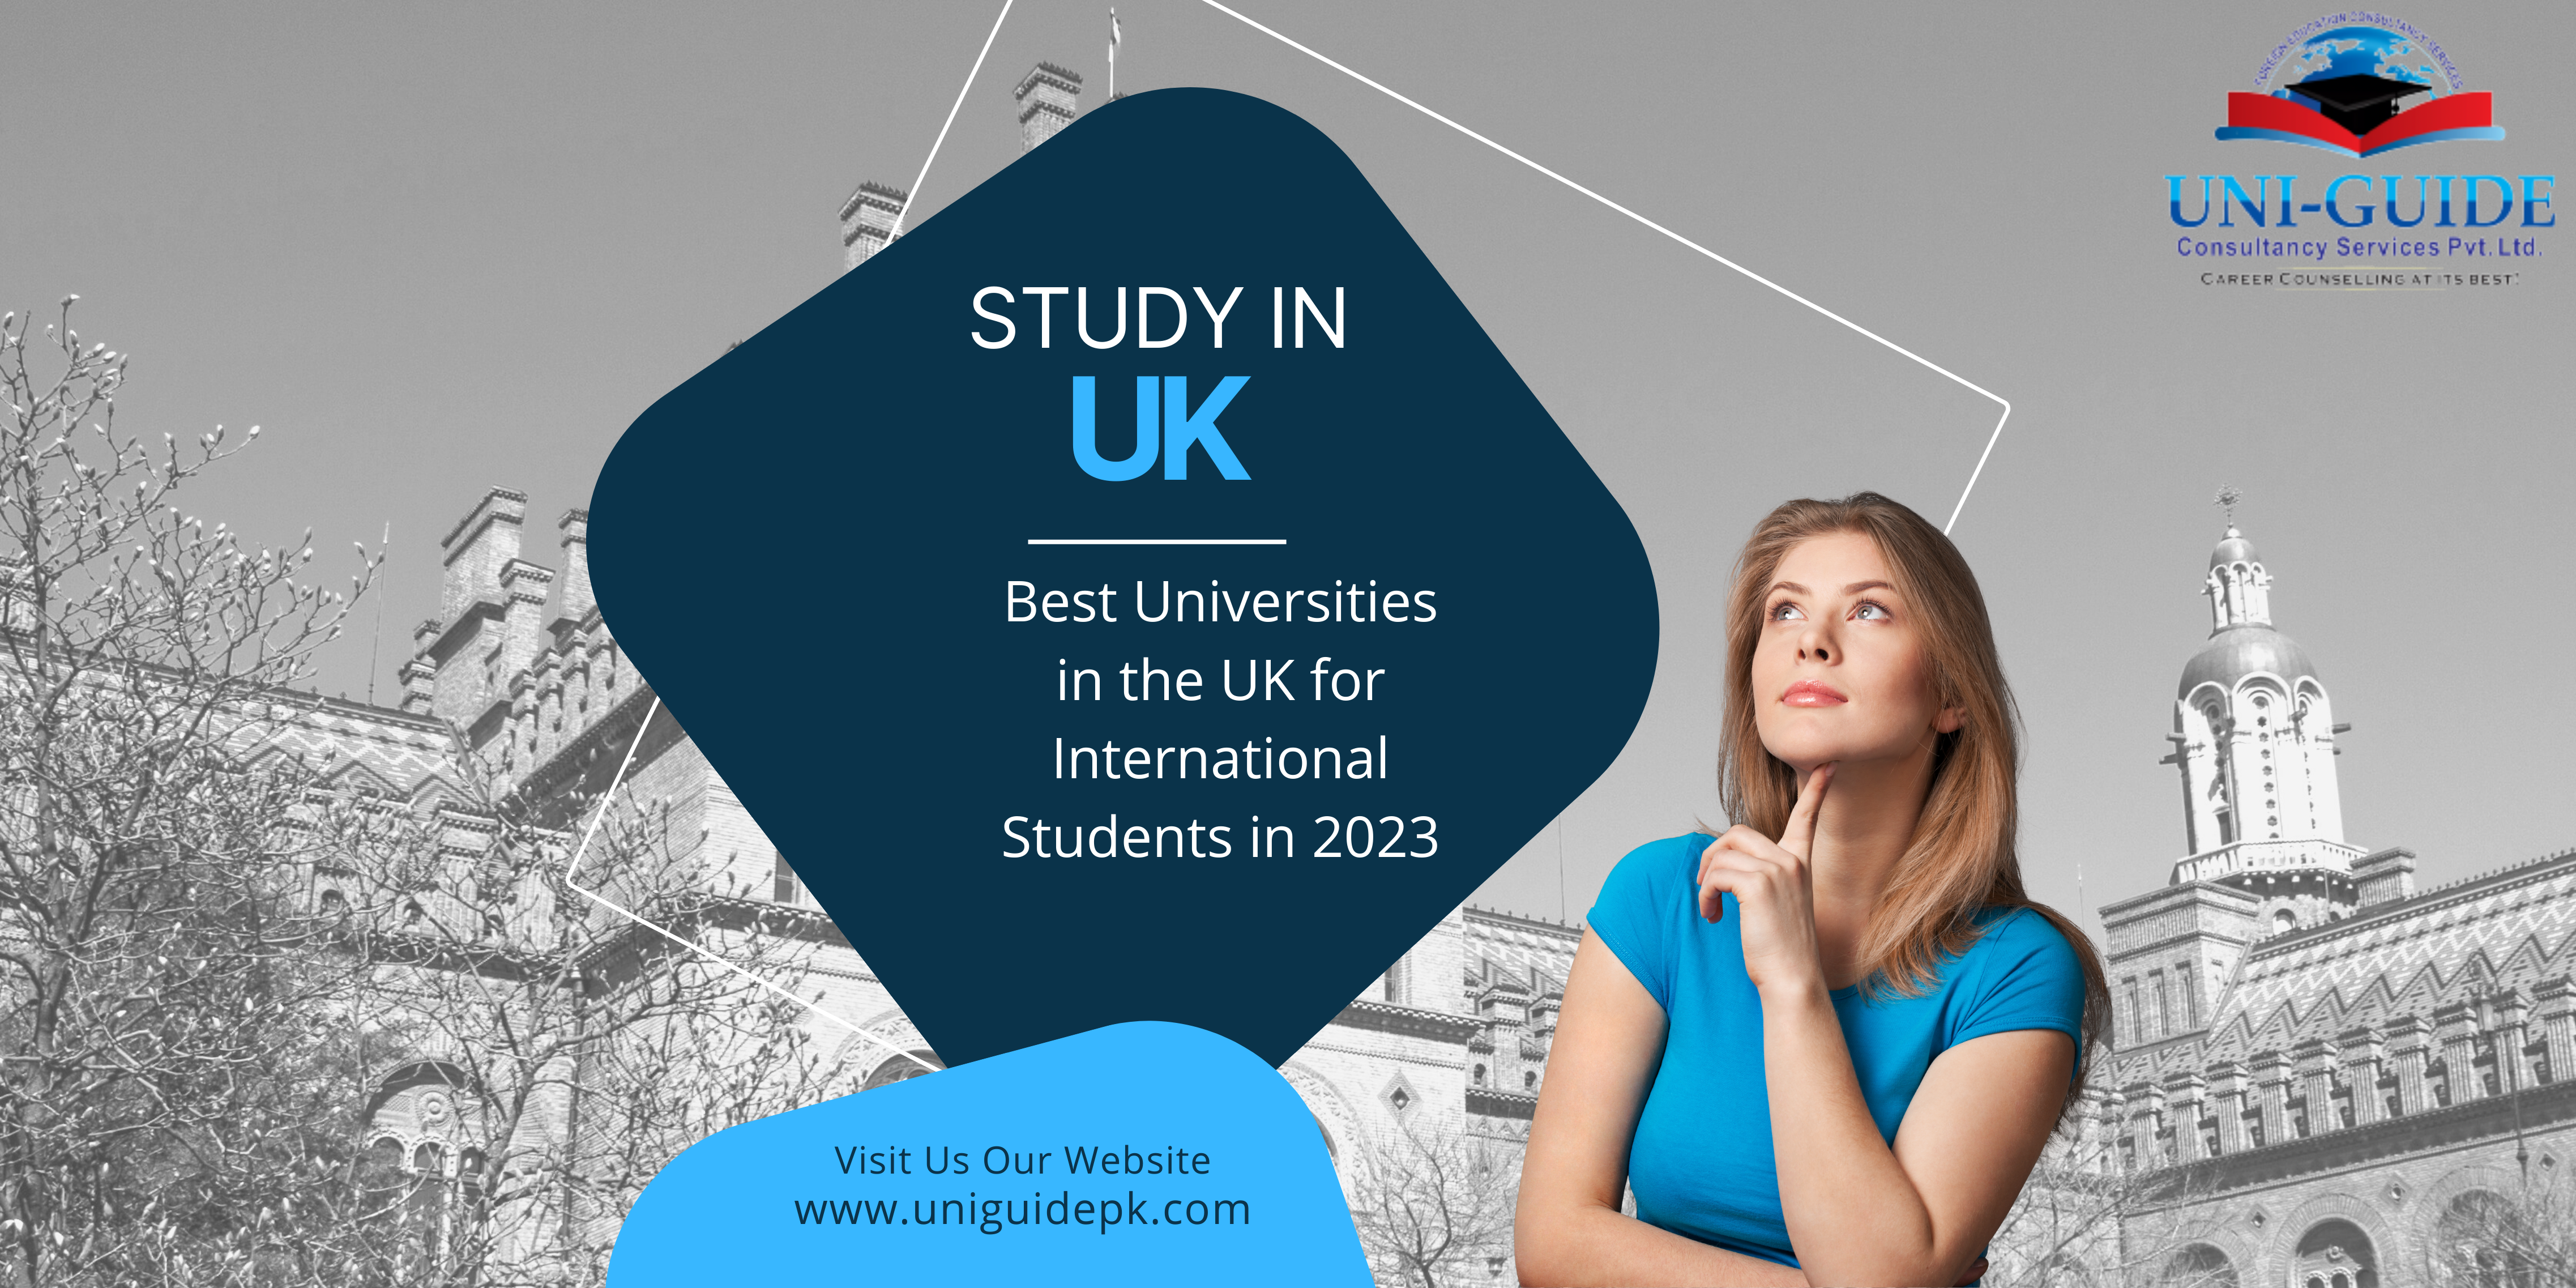 Best Universities in the UK for International Students in 2023